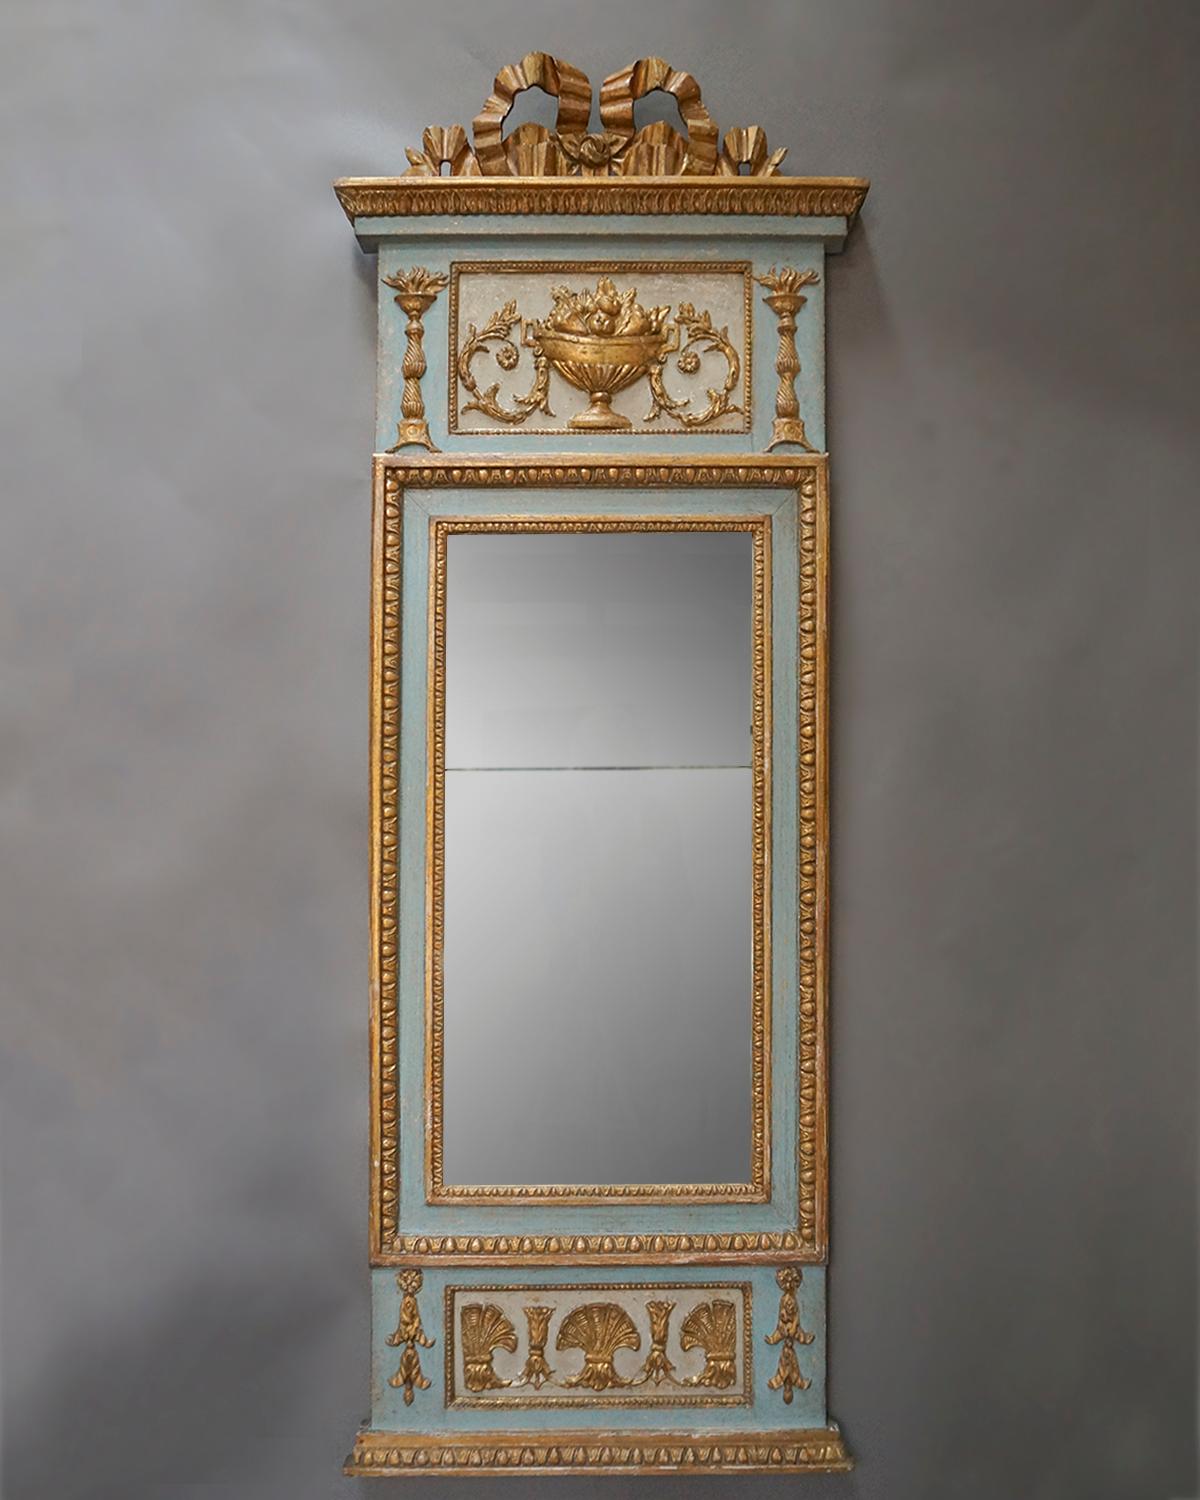 Gustavian pier mirror, Sweden, circa 1790, with original split mercury glass panels. The beautiful frame has a carved bow at the top and panels of gilt elements above and below the glass. Original painted surface and back.